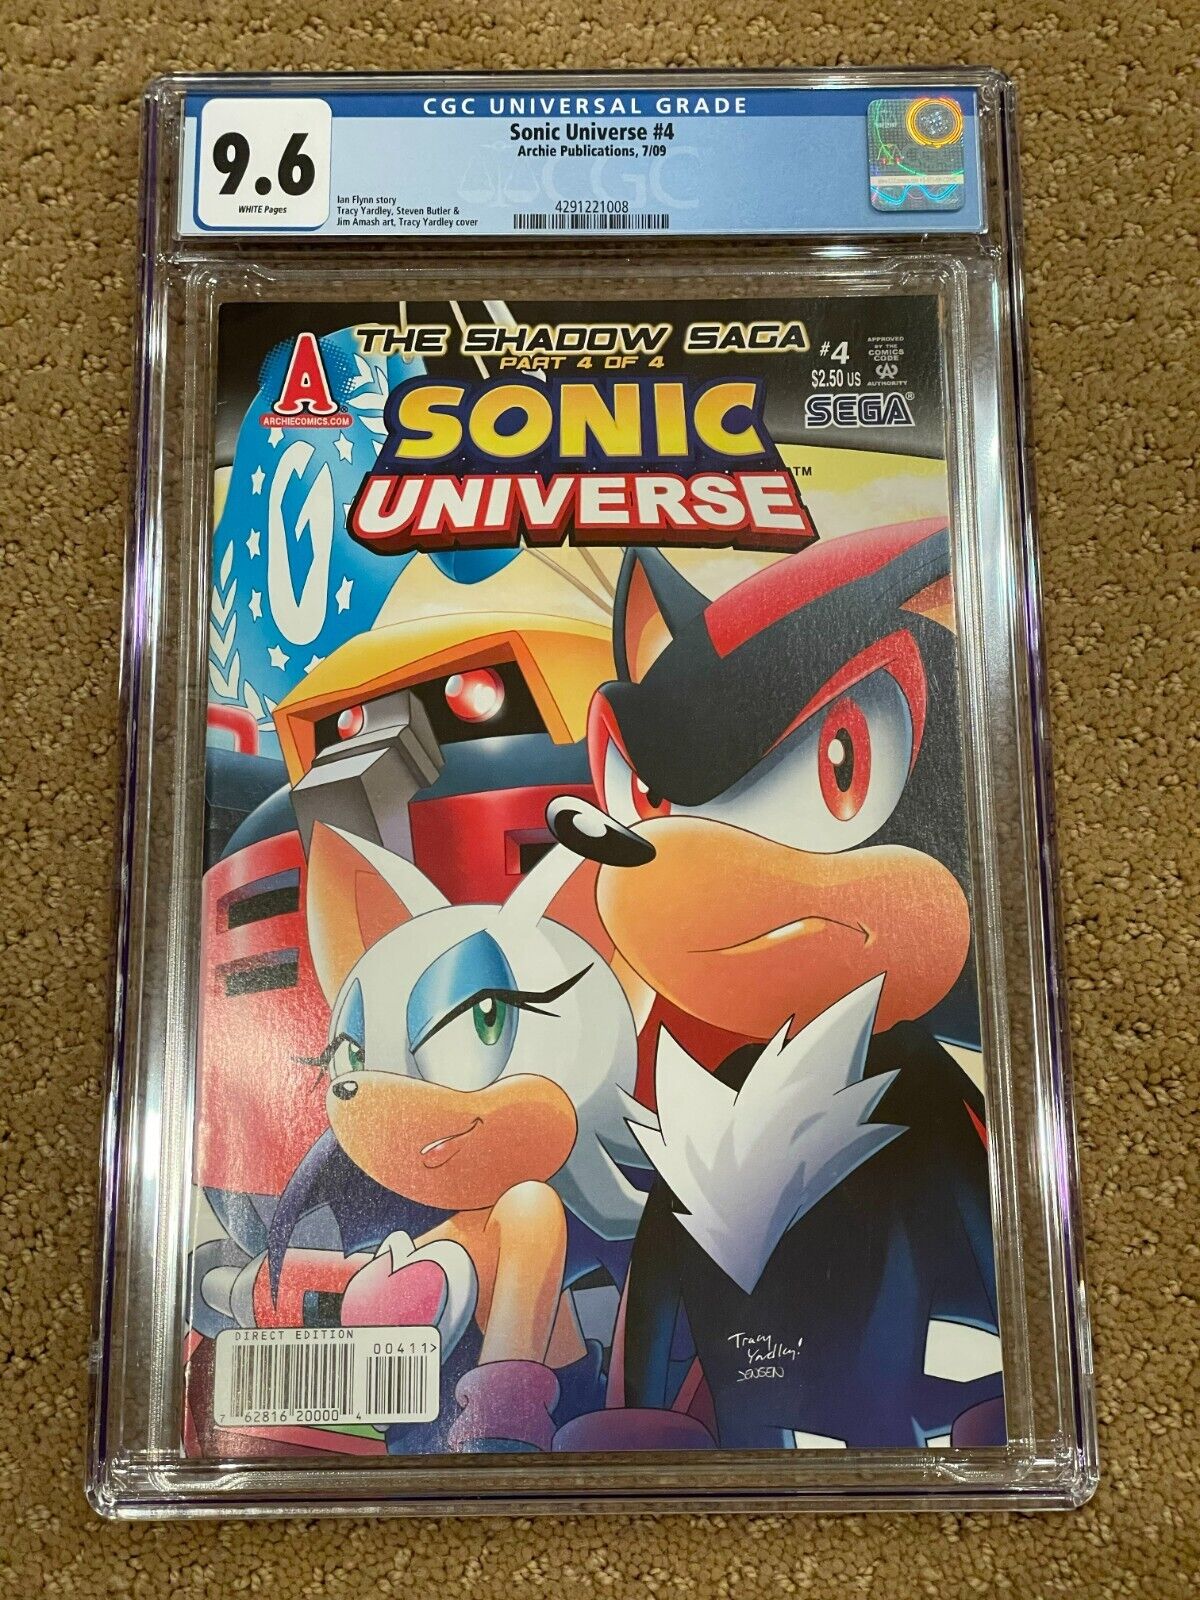 SONIC UNIVERSE #4 CGC GRADED 9.6 NM+ WHITE PAGES ARCHIE COMICS 2009 RARE